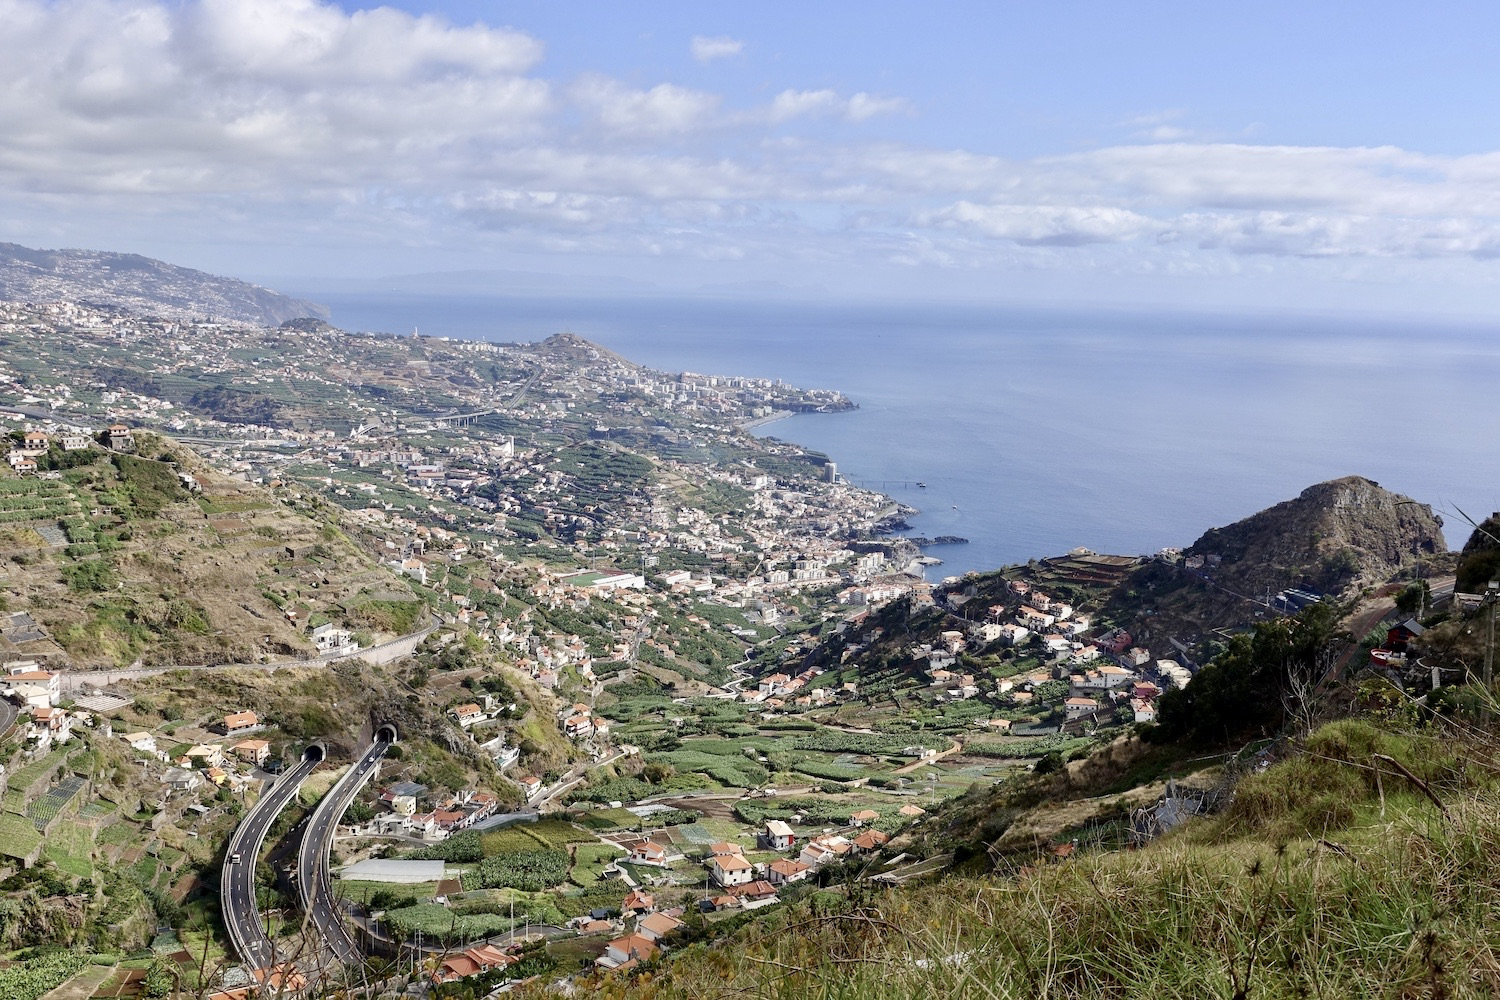 well developed road network in Madeira, viewed from Cabo Girão Skywalk